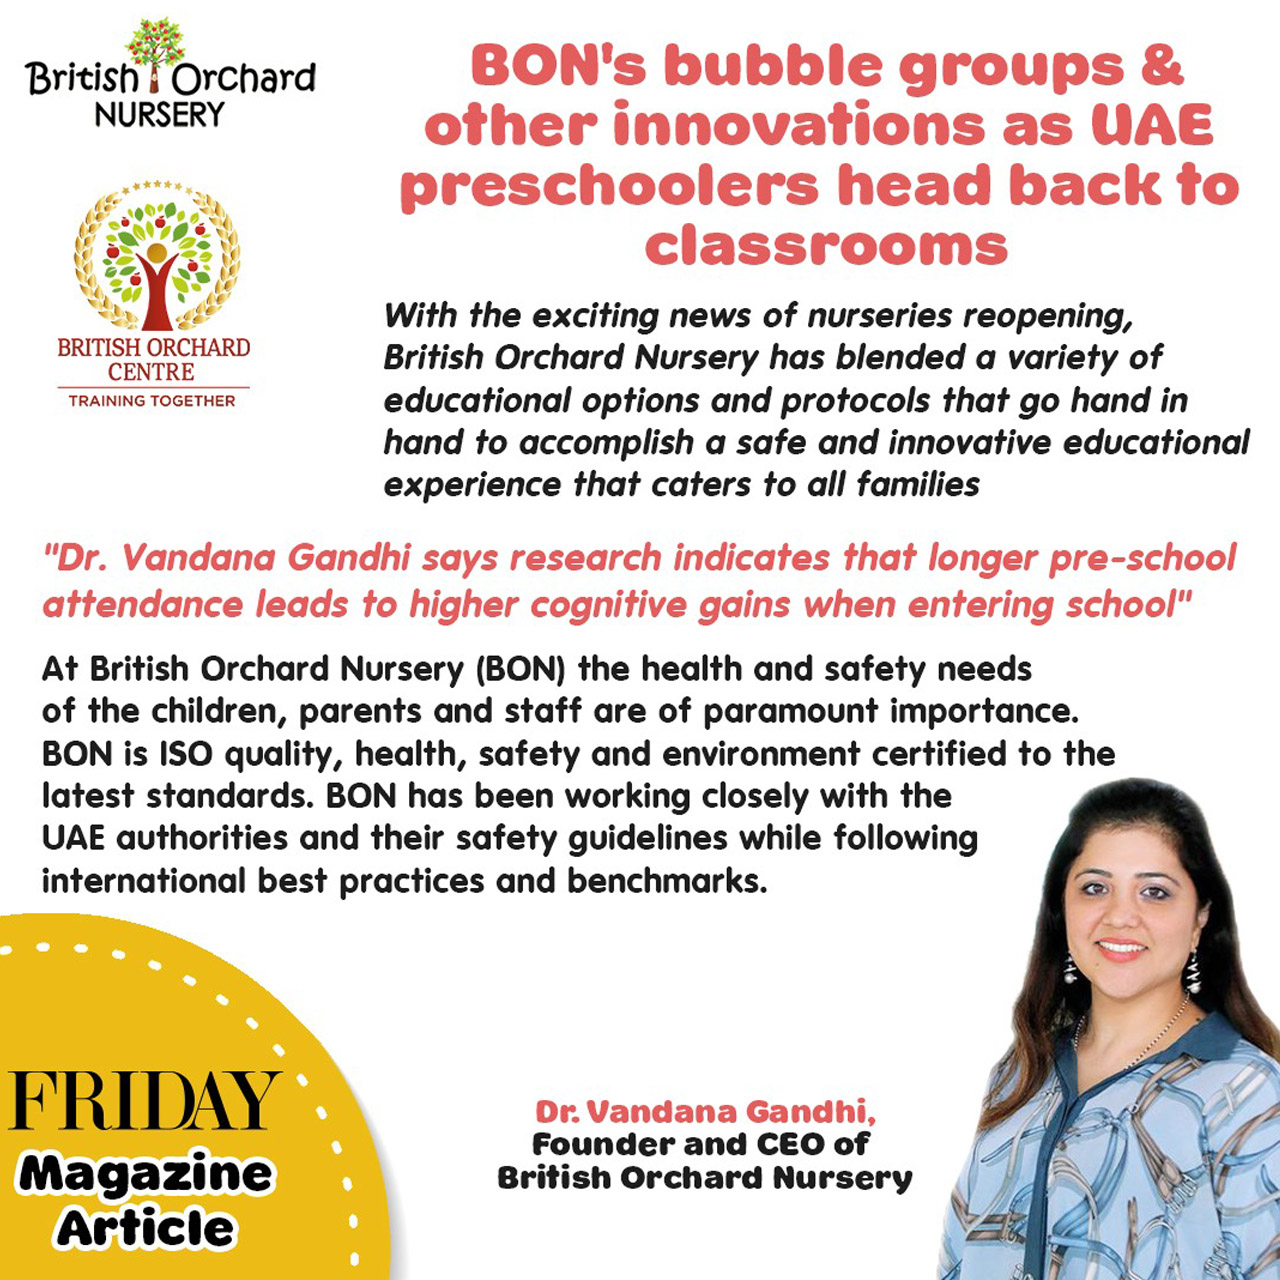 Let's gear up to go #backtoschoolwithbon as we introduce bubble group